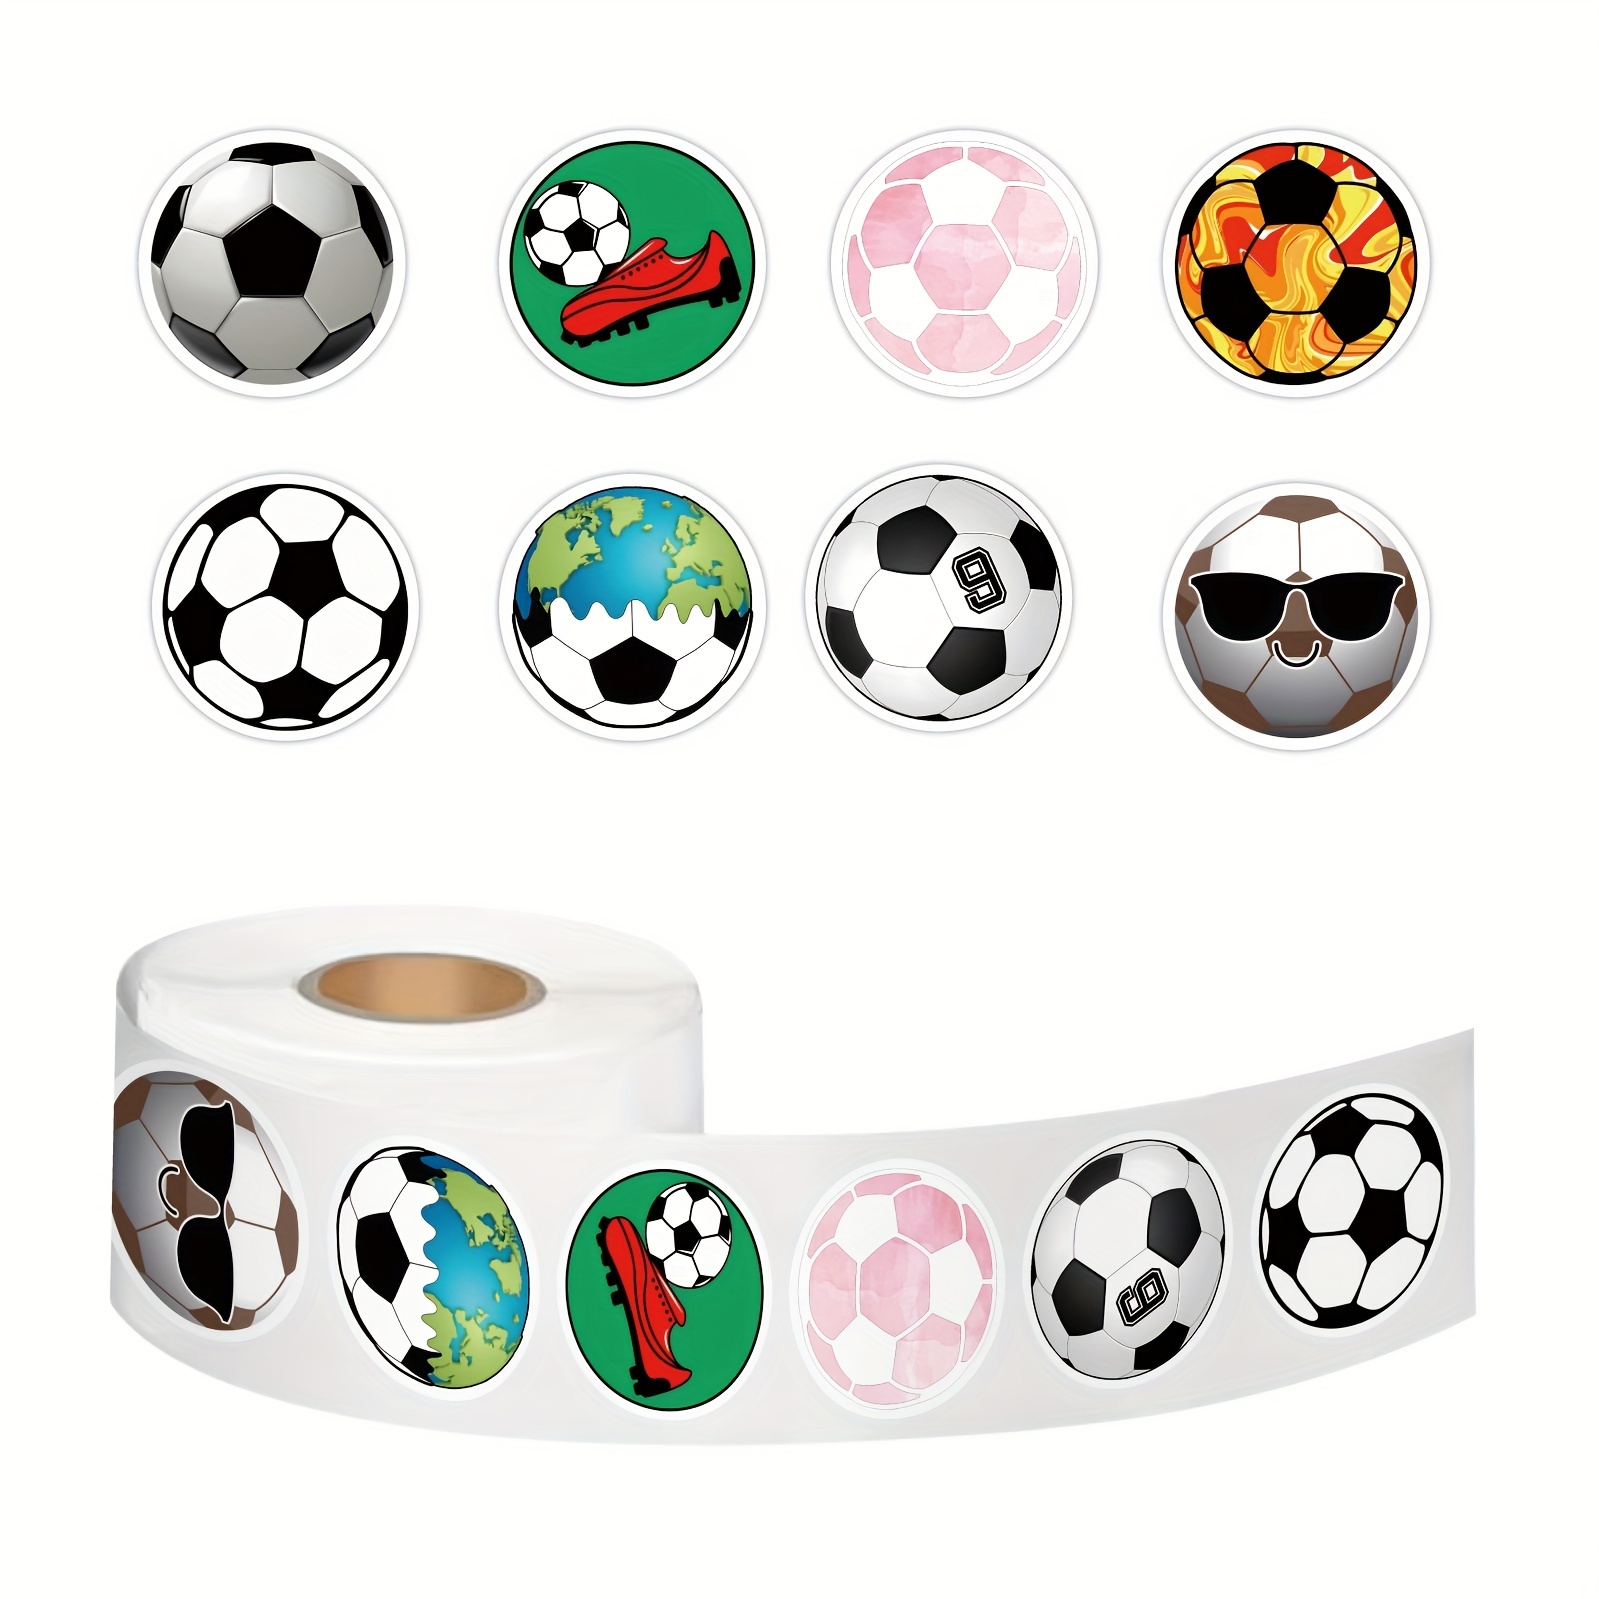 

500pcs Soccer Stickers Roll, Vinyl Soccer Sports Stickers, Water Bottles Laptop Car Decal Perfect Gifts For Girls And Teenagers Cute Soccer Stickers